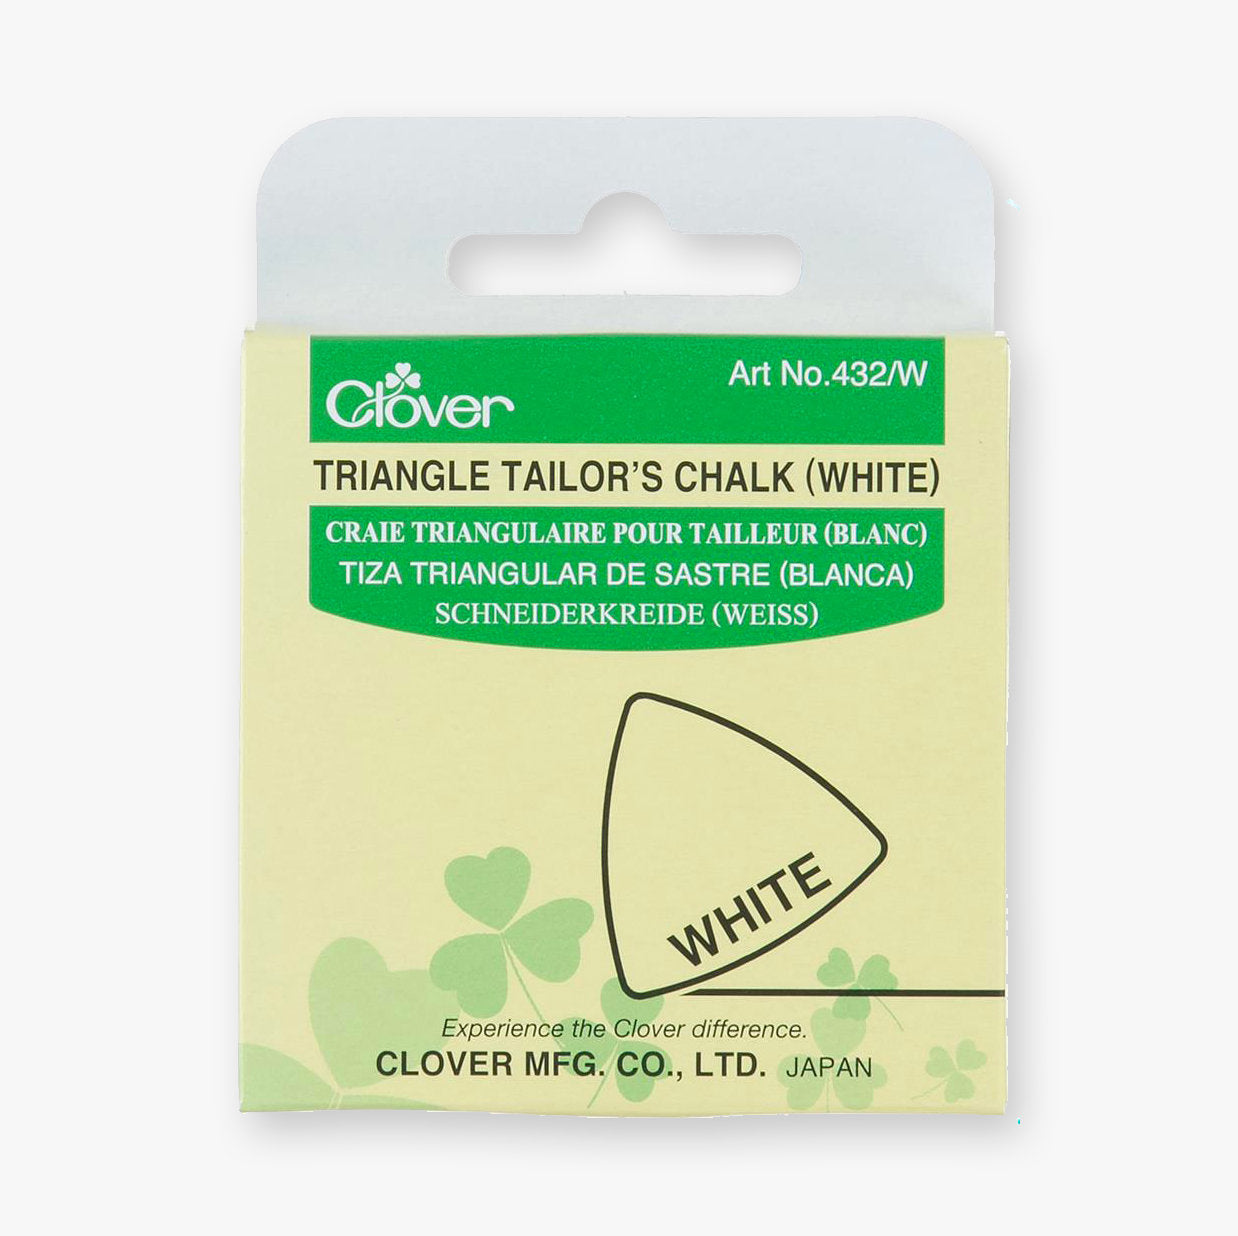 Clover Triangular Tailor's Chalk: Precision and Versatility in your Marks